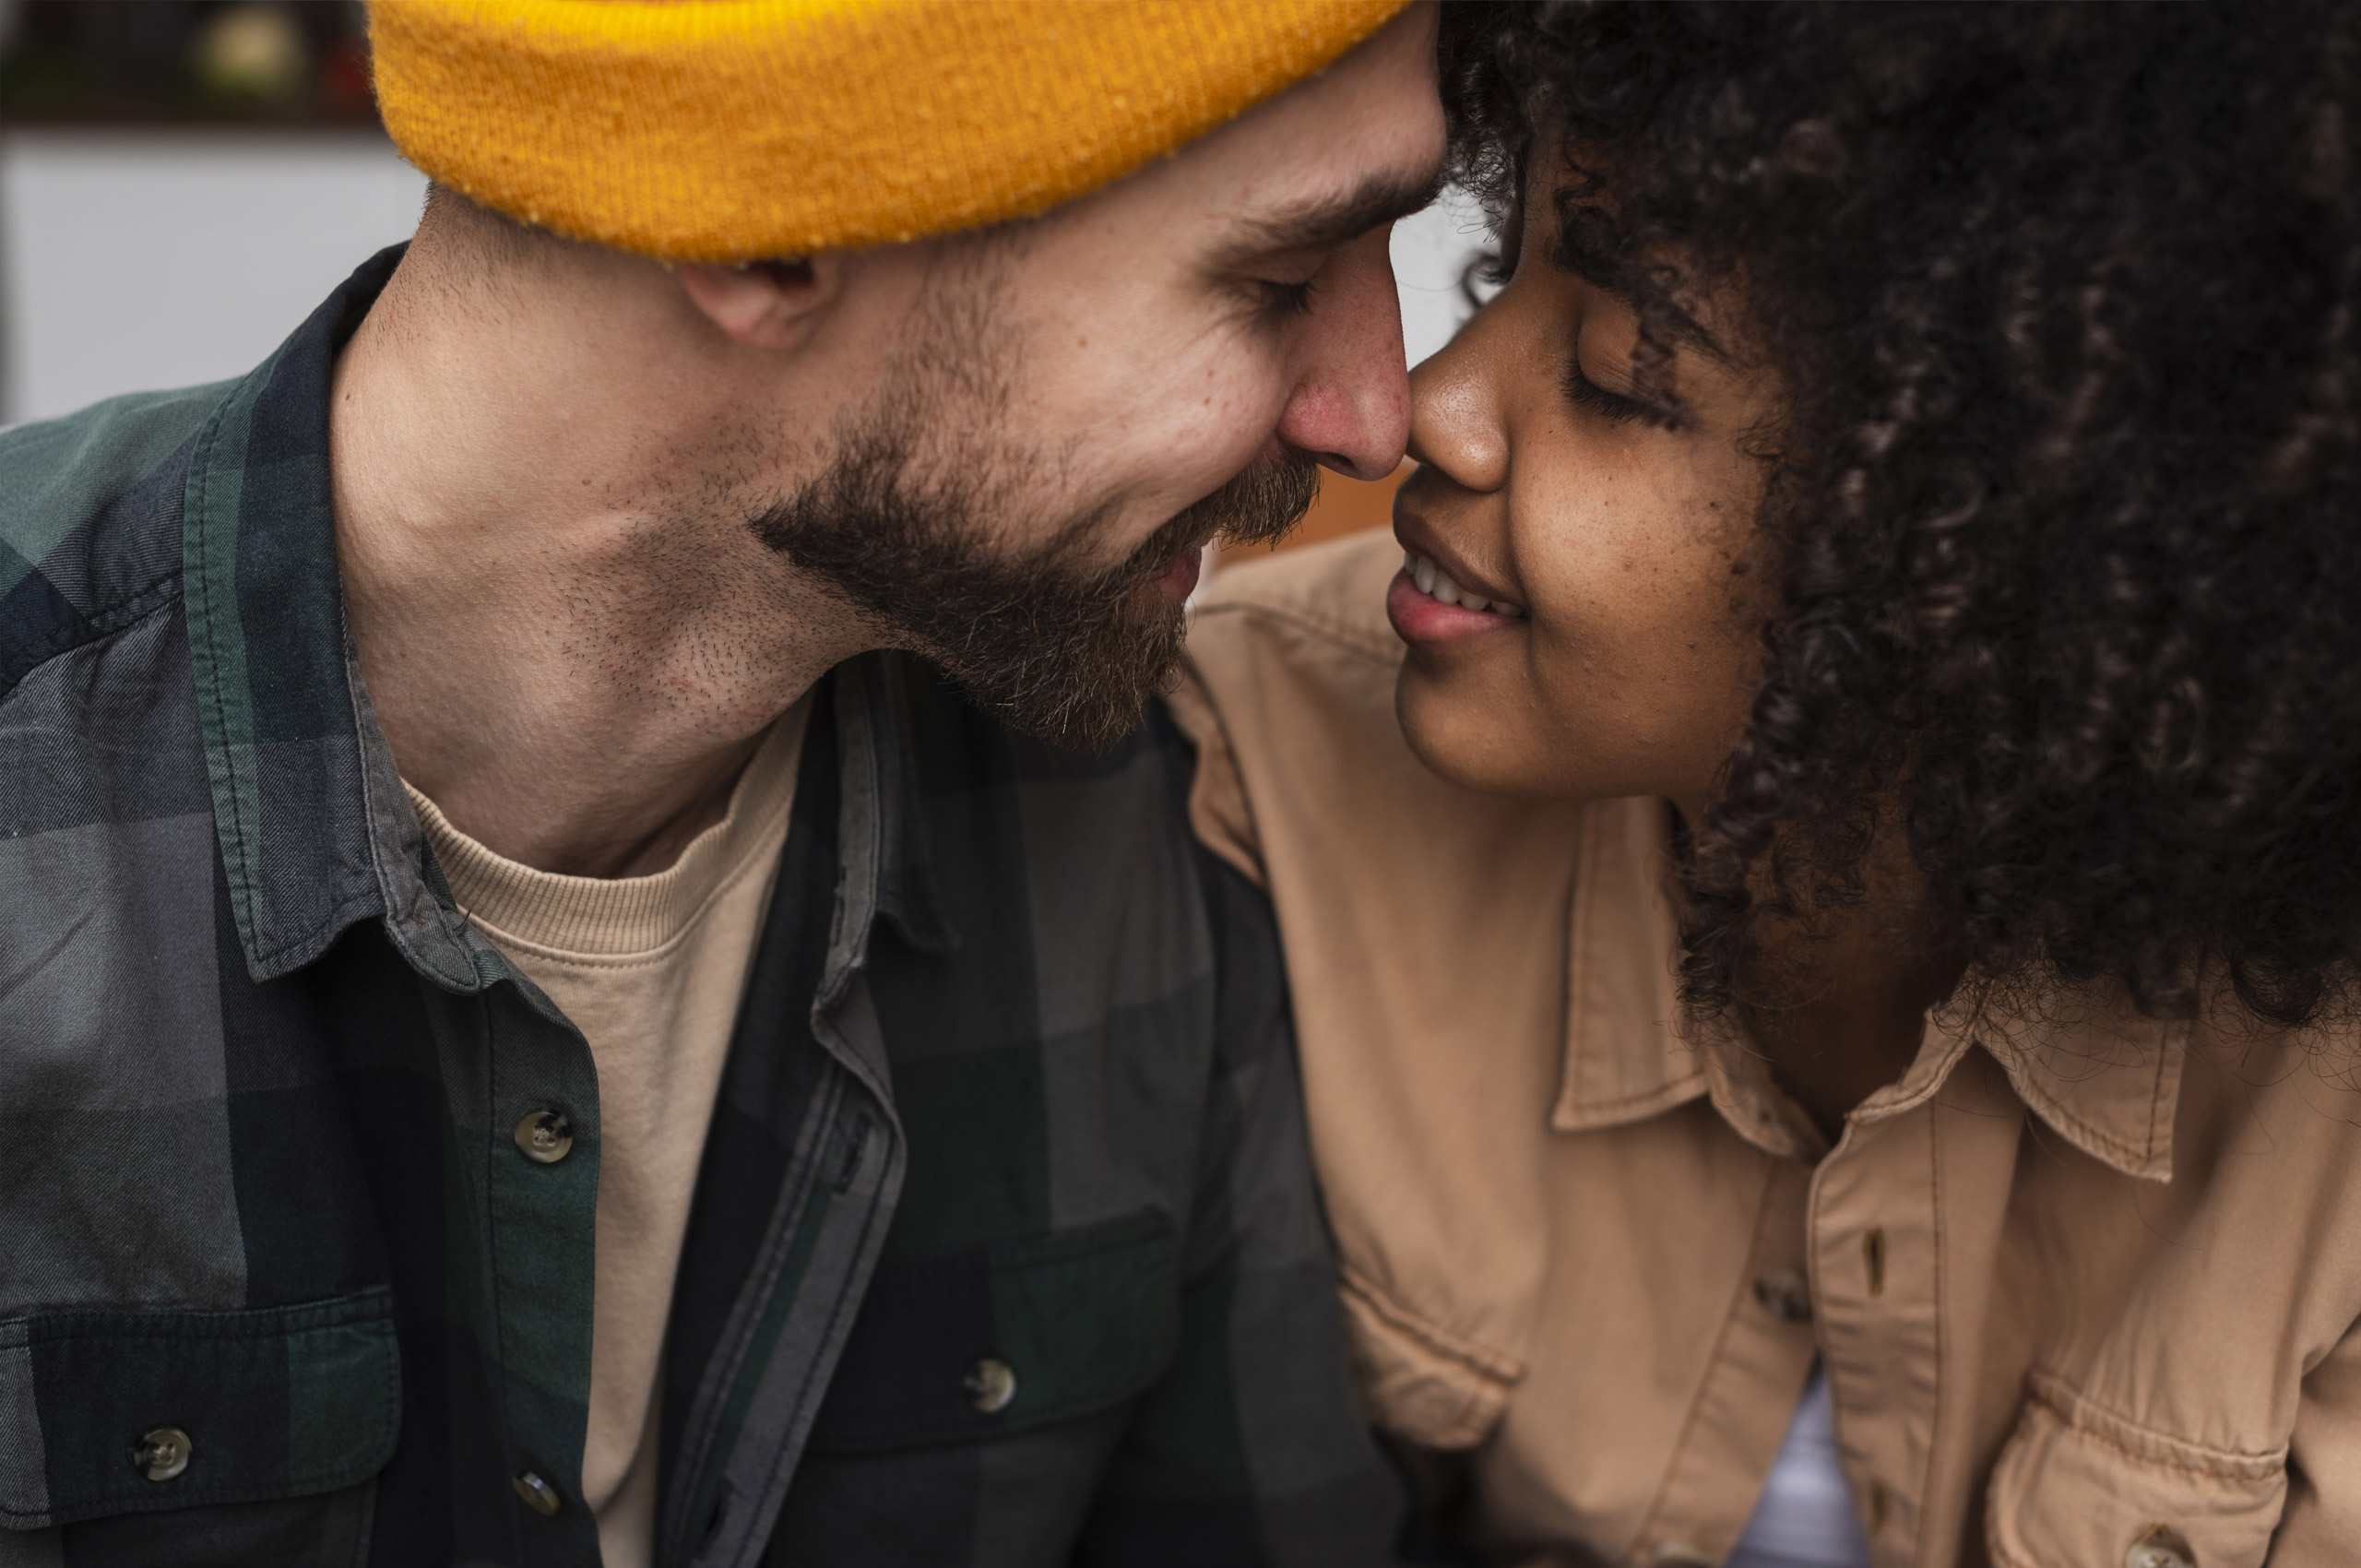 7 ways to enhance closeness in your relationship